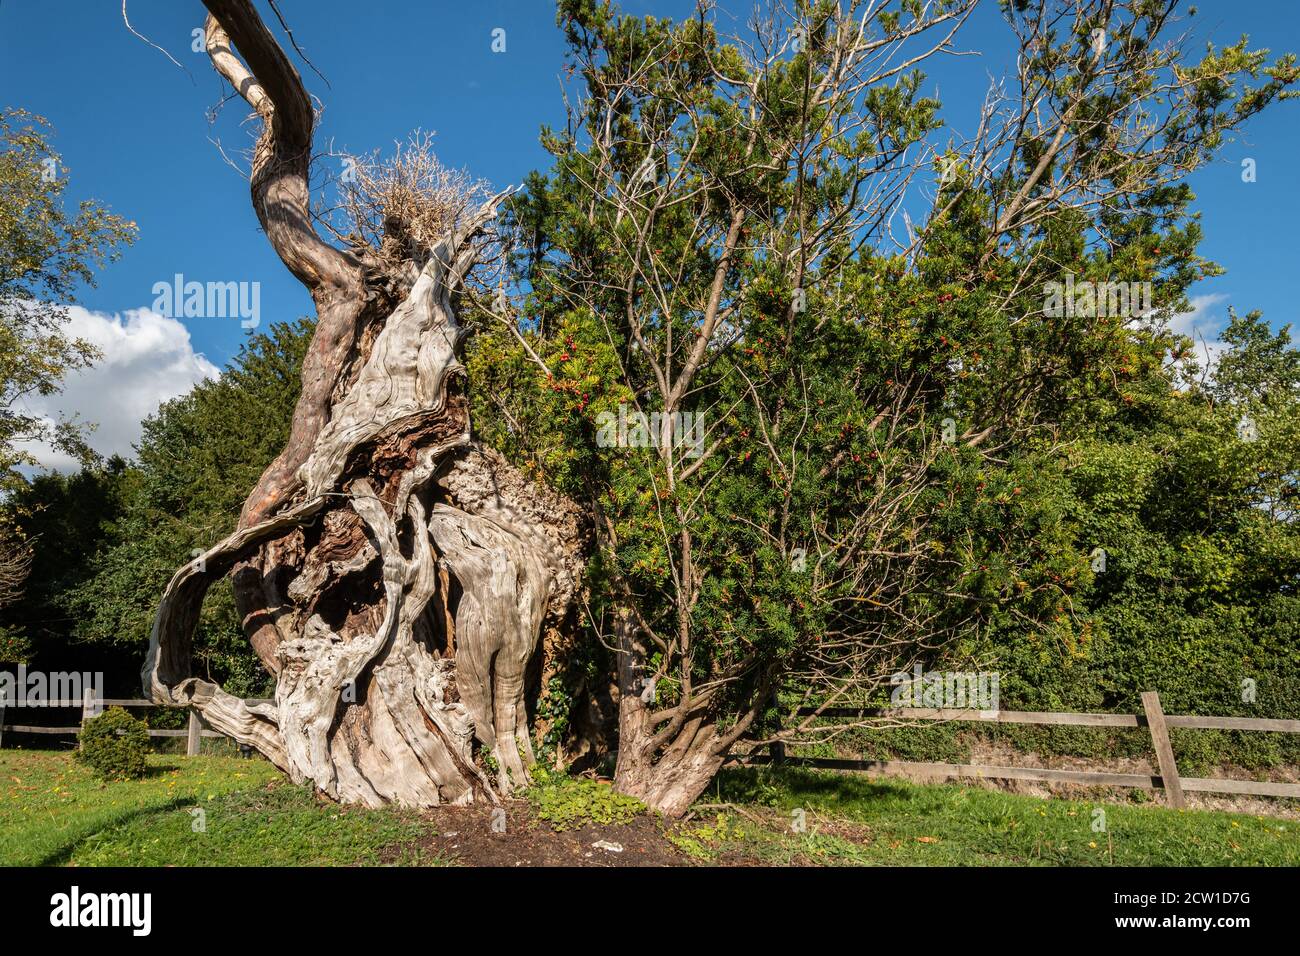 The Aldworth Yew, an ancient tree more than one thousand years old, in the churchyard of St Marys church, Aldworth, Berkshire, UK Stock Photo